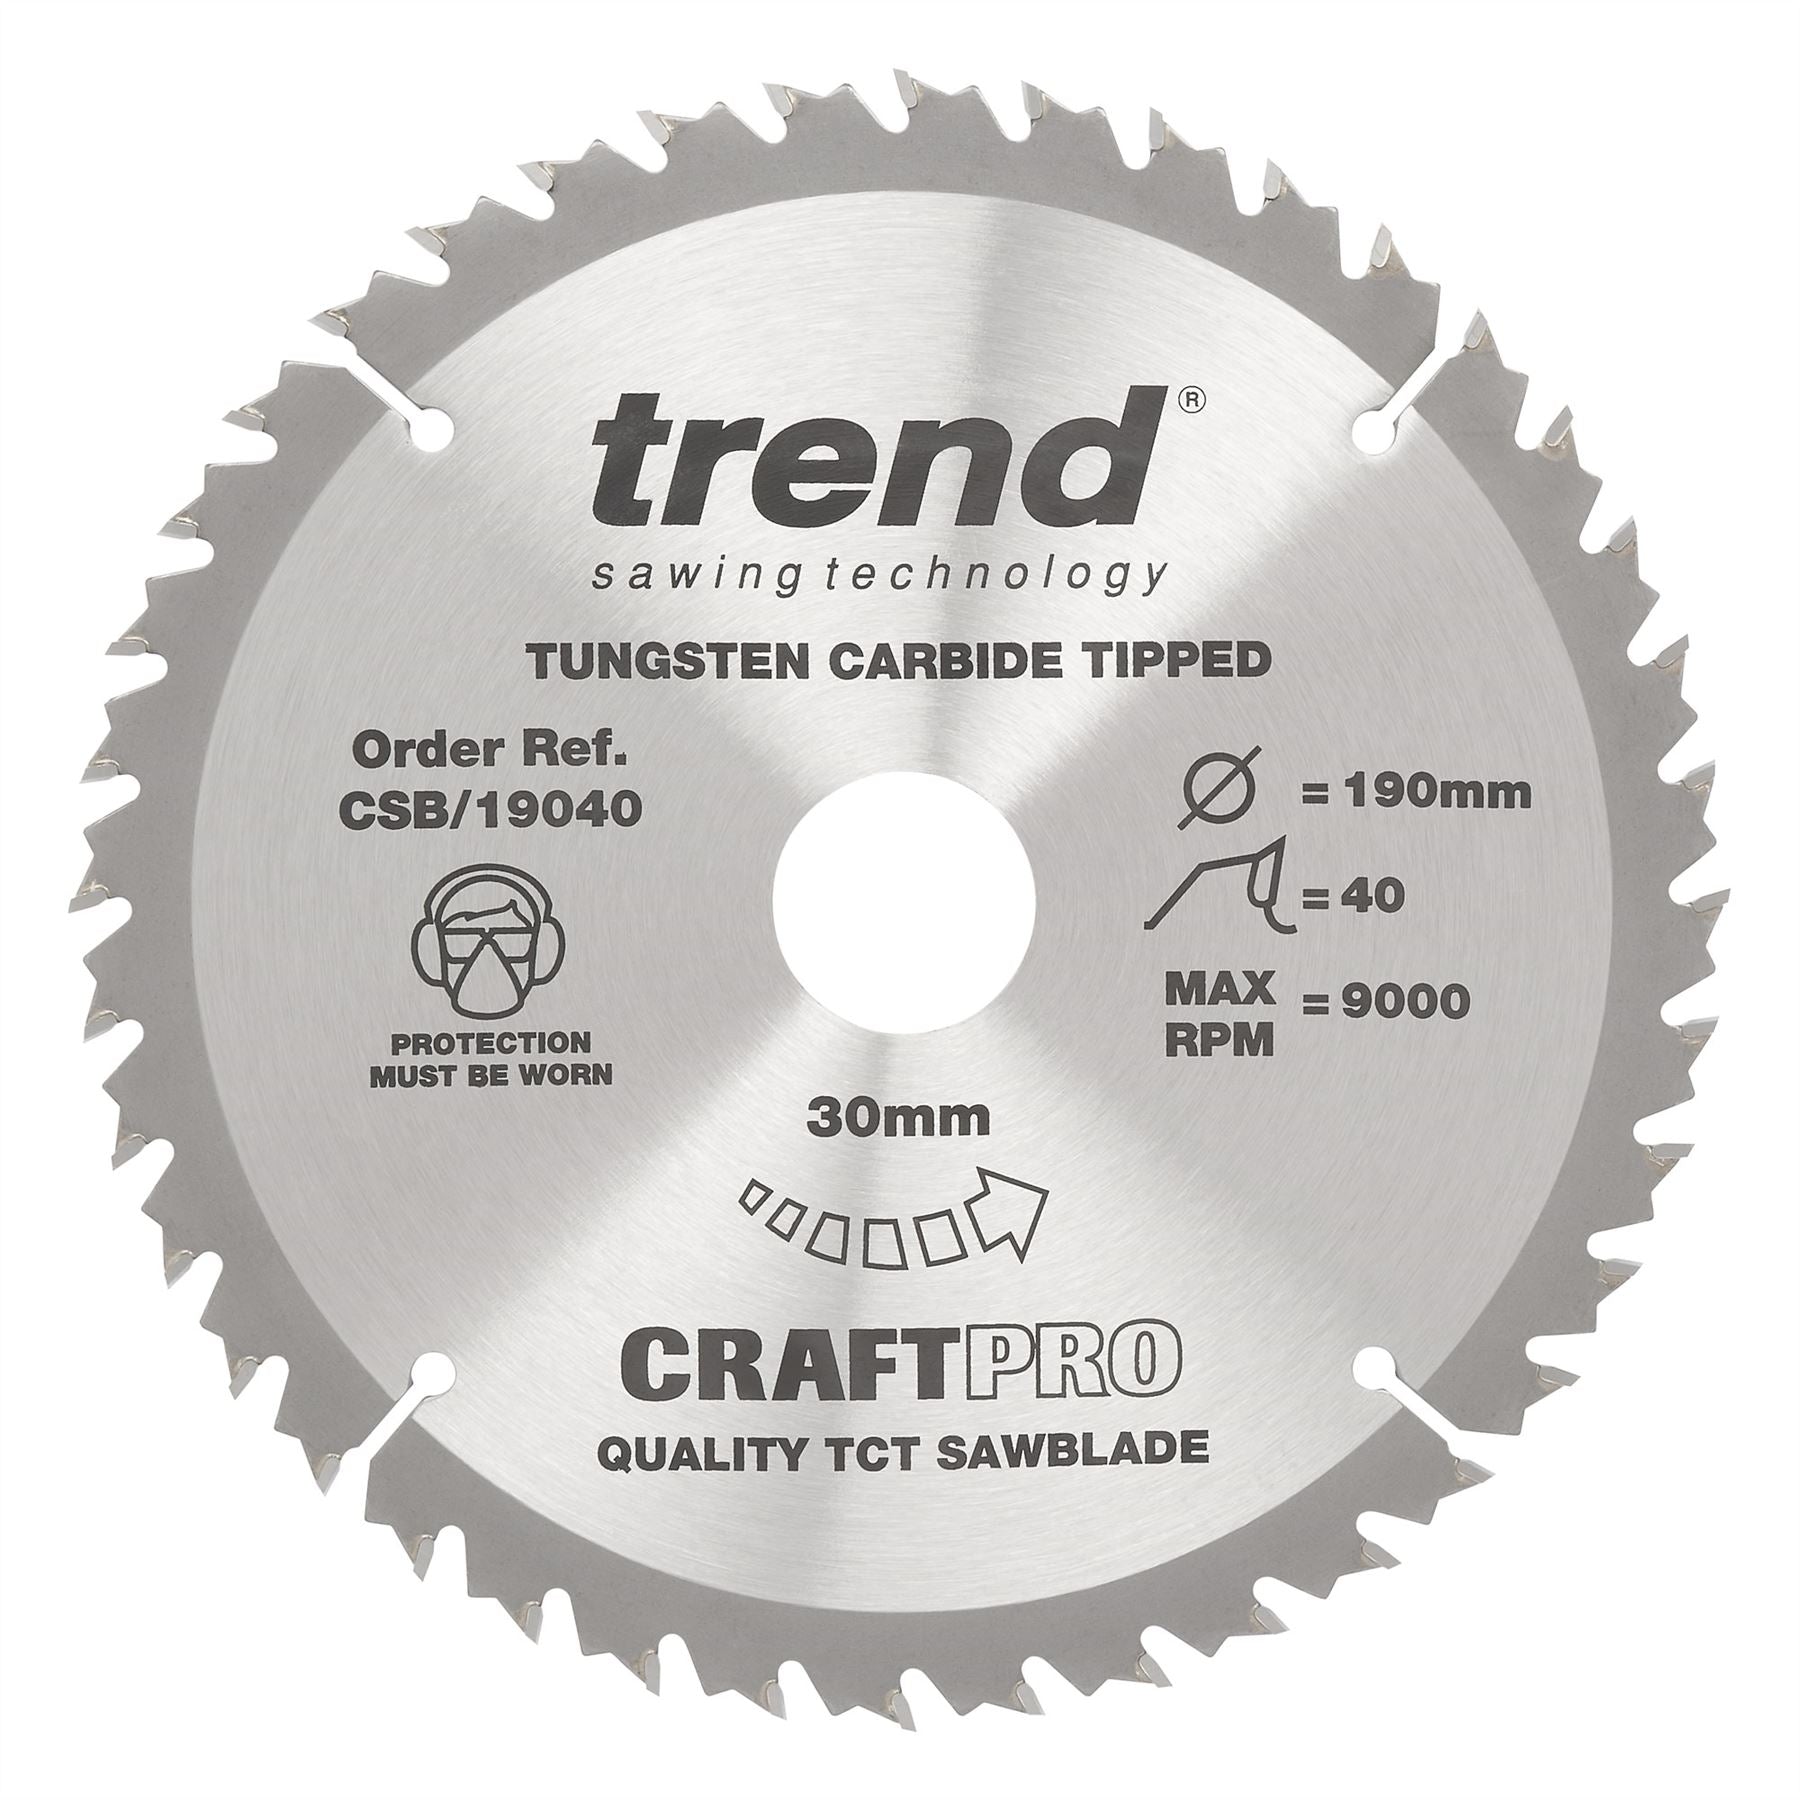 Trend The Craft Pro 190mm Diameter 30mm Bore 40 Tooth General Purpose Saw Blade For Hand Held Circular Saws. CSB/19040